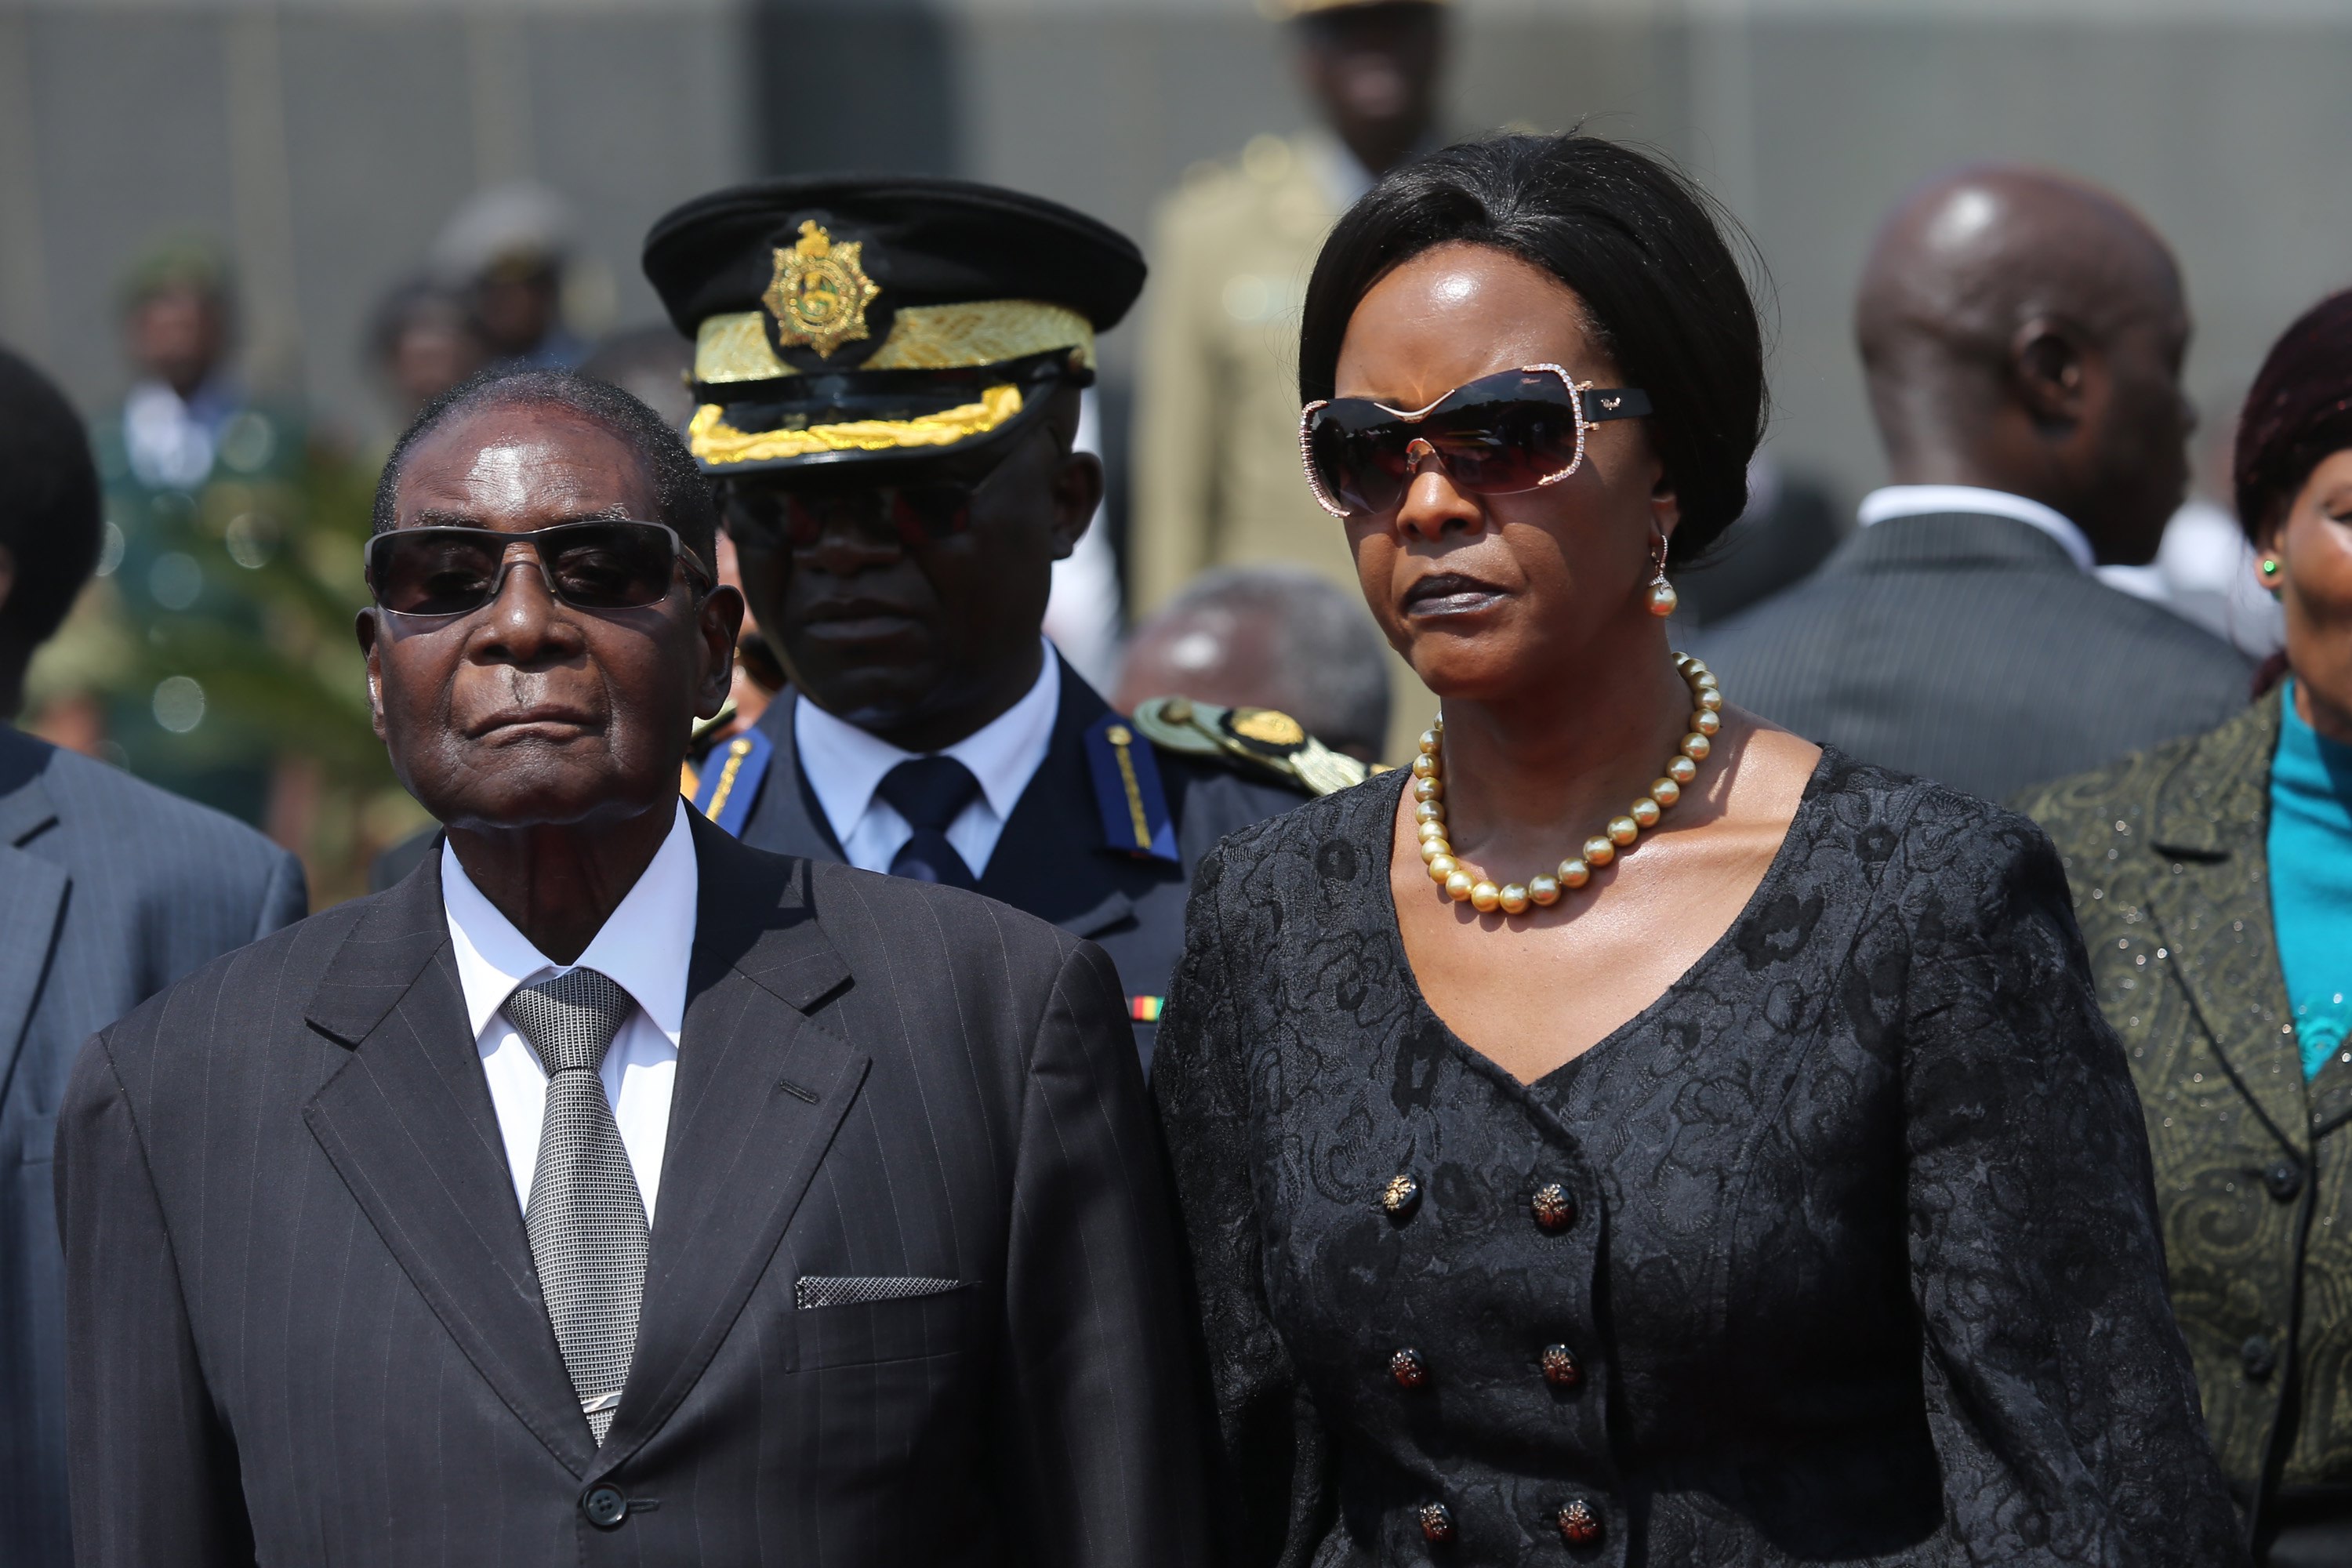 2017-08-26 00:00:00 epa06330456 (FILE) - Zimbabwean President Robert Mugabe (L) accompanied by his wife Grace (R) arrive at the National Heroes Acre in Harare, Zimbabwe, 26 August 2017 (reissued 15 November 2017). The Zimbabwe National Army (ZNA) has reportedly taken control over the government of President Robert Mugabe. The army seized the national broadcaster's headquarters (ZBC) on 14 November night, to announce that President Mugabe and his family were safe but without citing their whereabouts. The military denied it staged a coup d'etat. EPA/AARON UFUMELI